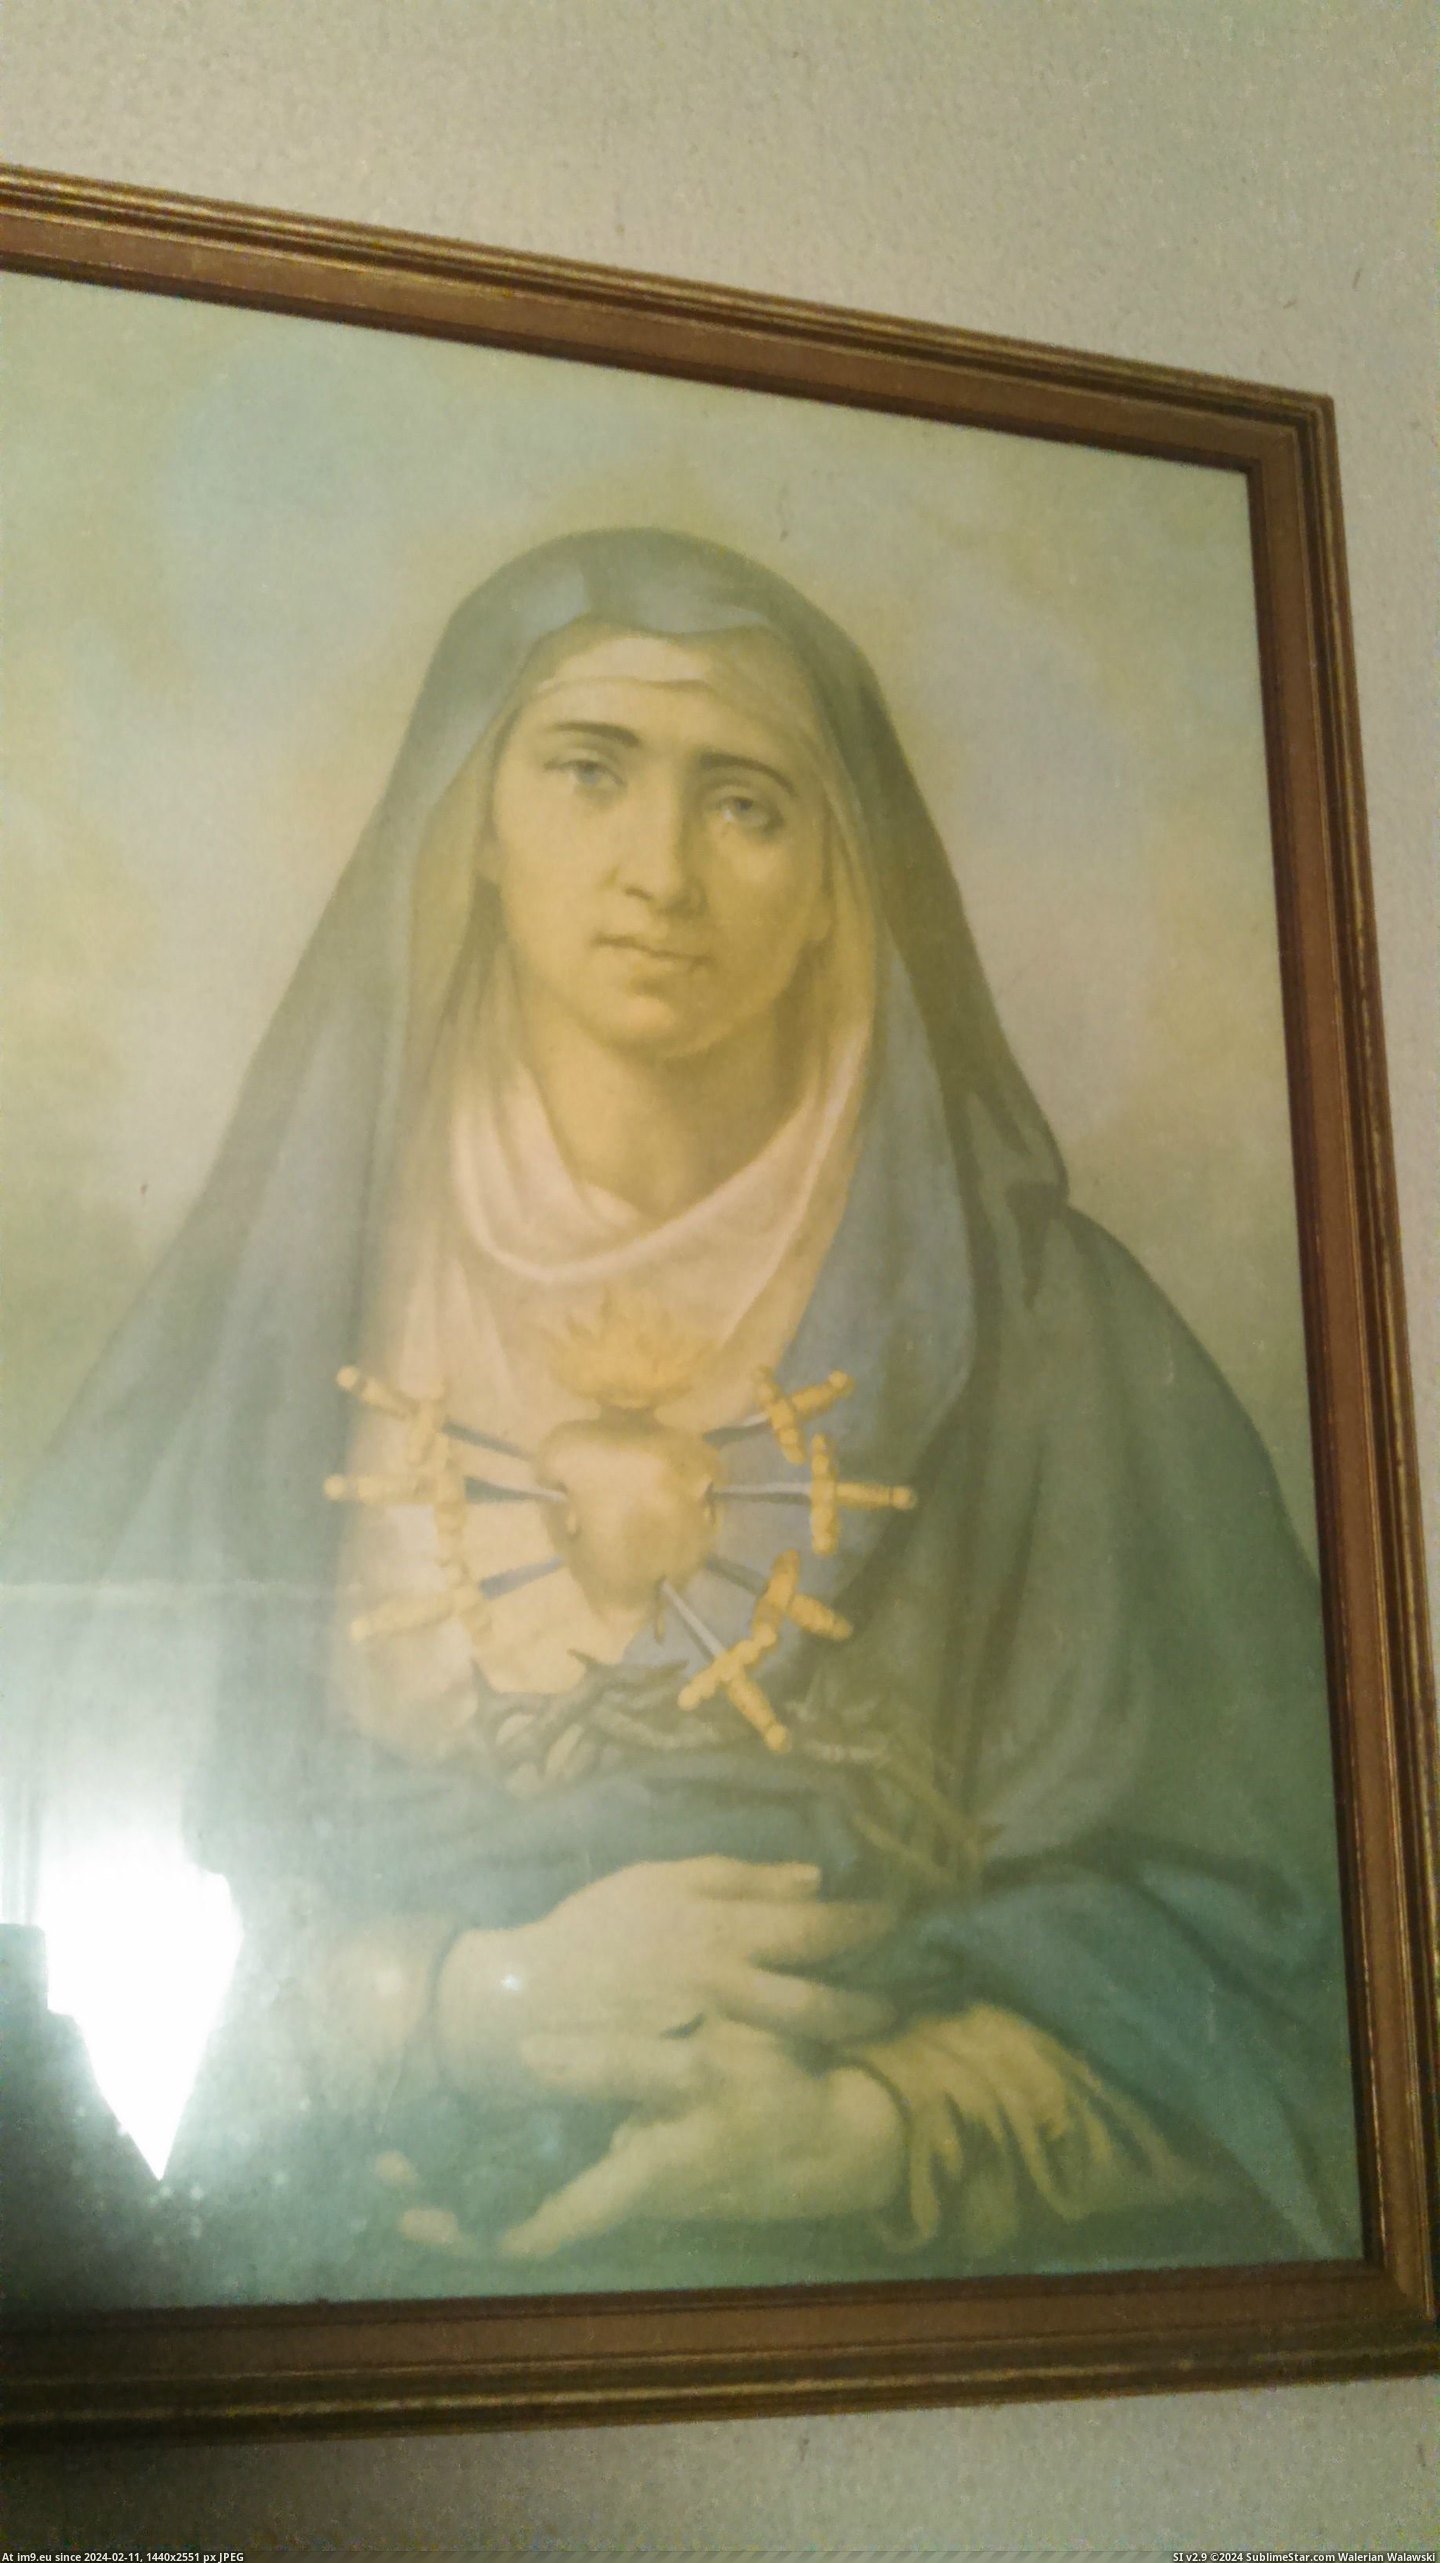 [Mildlyinteresting] This picture of the Virgin Mary looks like Nicolas Cage (in My r/MILDLYINTERESTING favs)